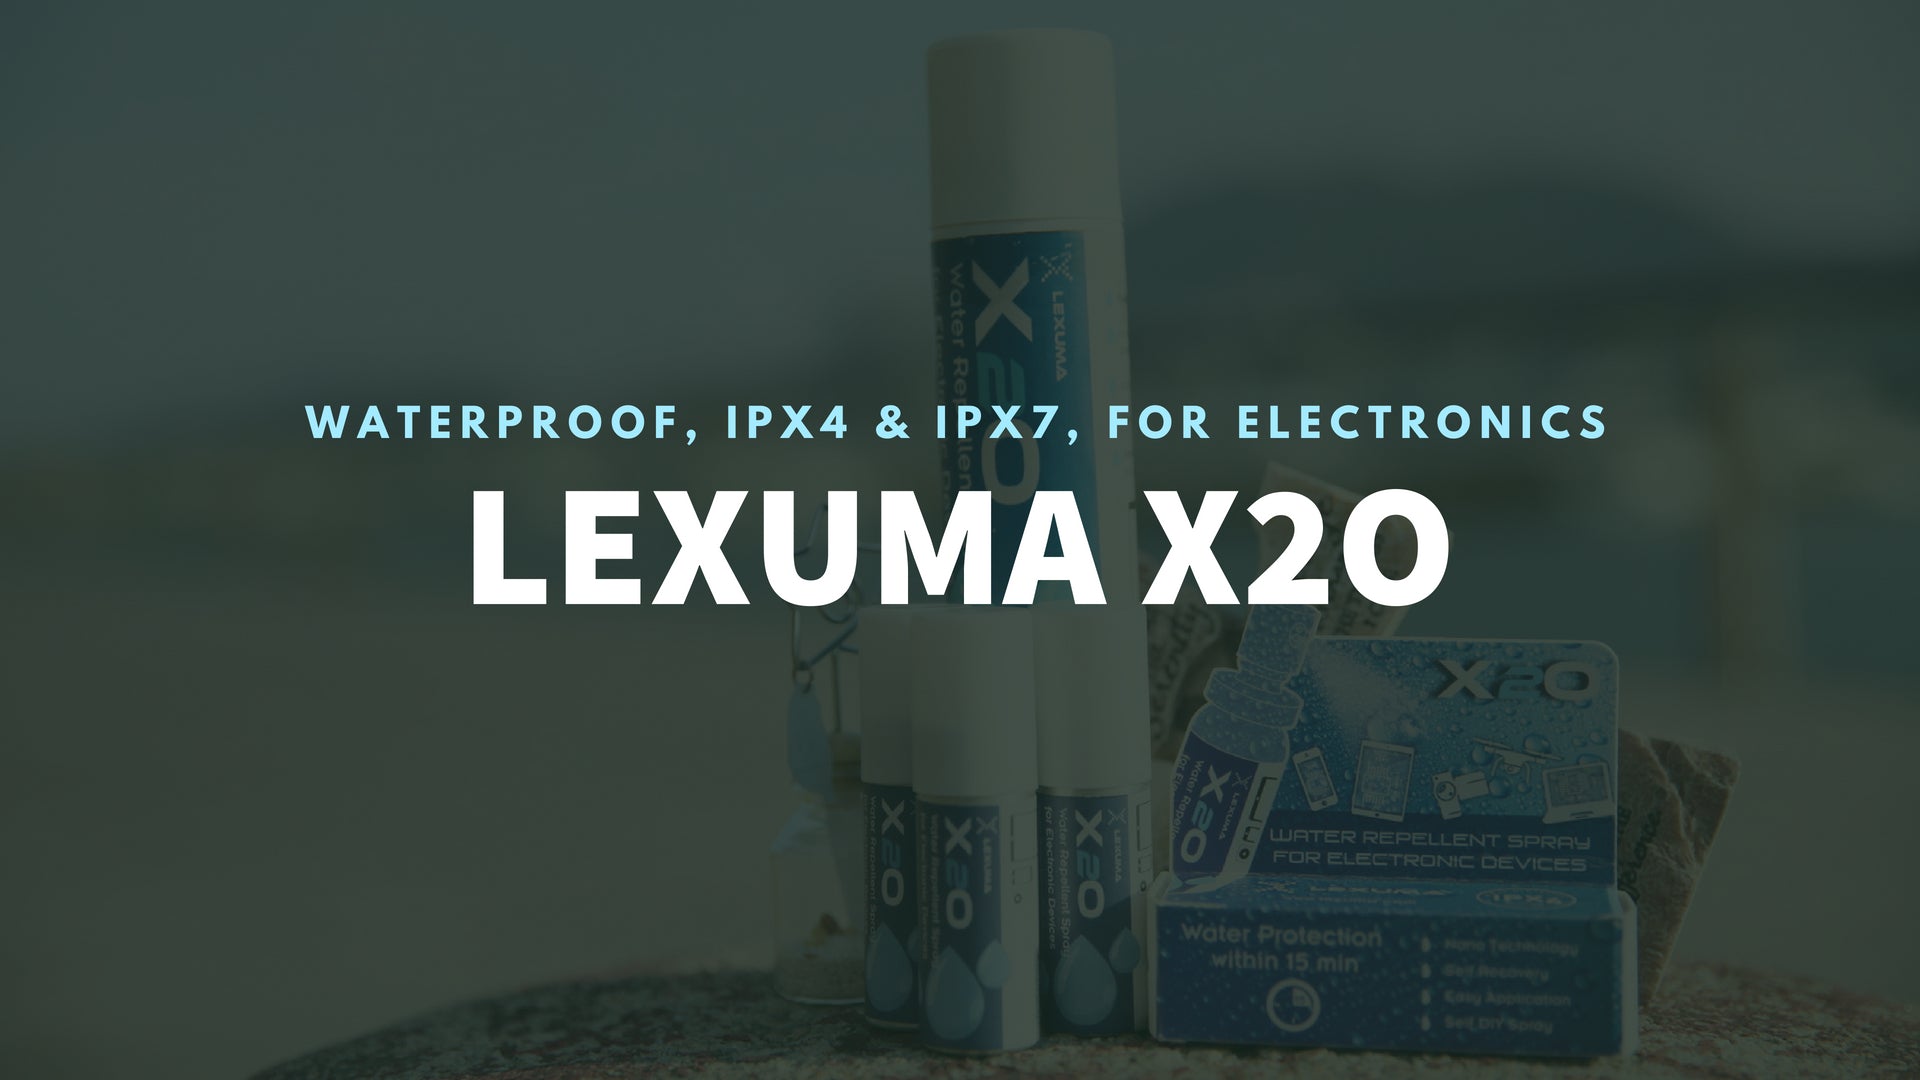 Lexuma 辣數碼防水噴霧 XWP-1010 X2O Water Repellent Spray with IPX4 and IPX7 water protection conformal protective coating electronics pcb waterproofing circuit board sealer gel conformal clear coat for electronics moisture proof pcb waterproof nano spray for electronics devices mobile phone epoxy conformal coating sealant spray moisture proof Machinery Protection Banner